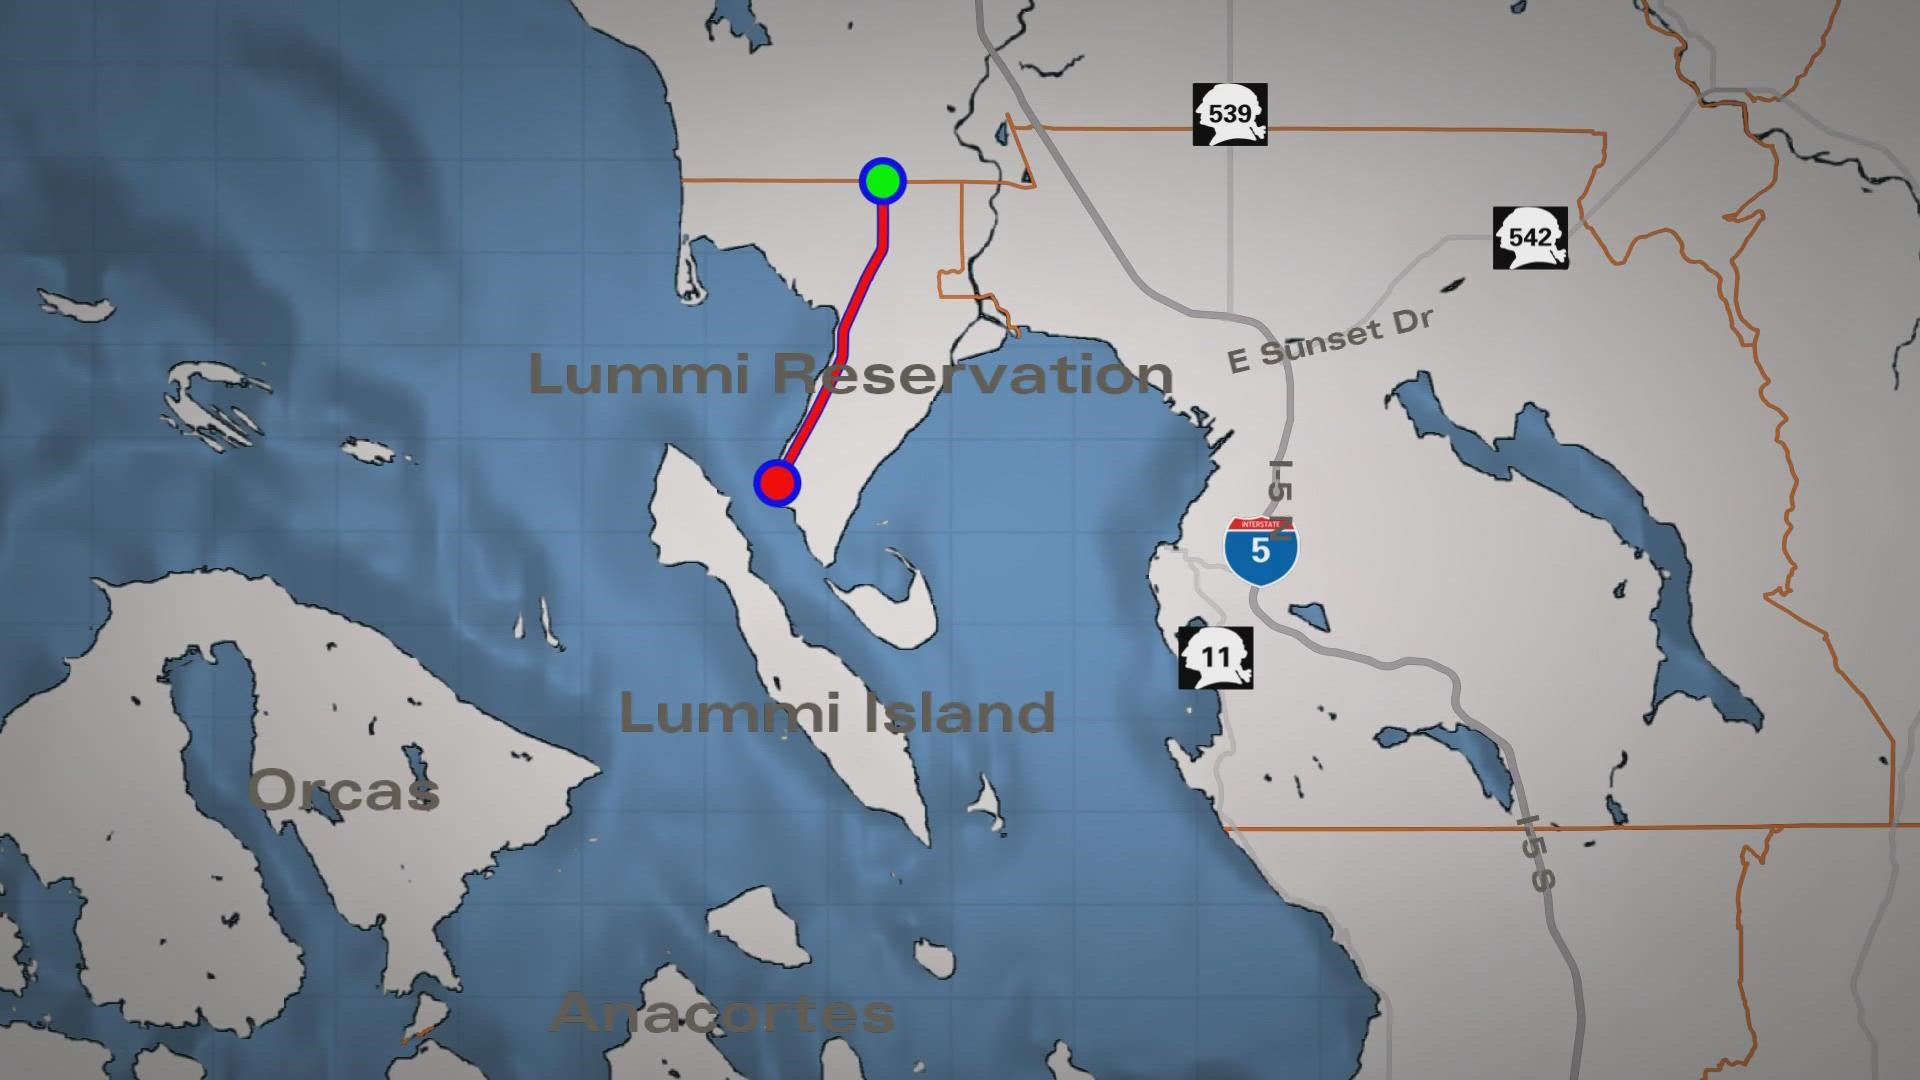 Haxton Road, which is the main access road off the Lummi reservation, closed on Thursday.